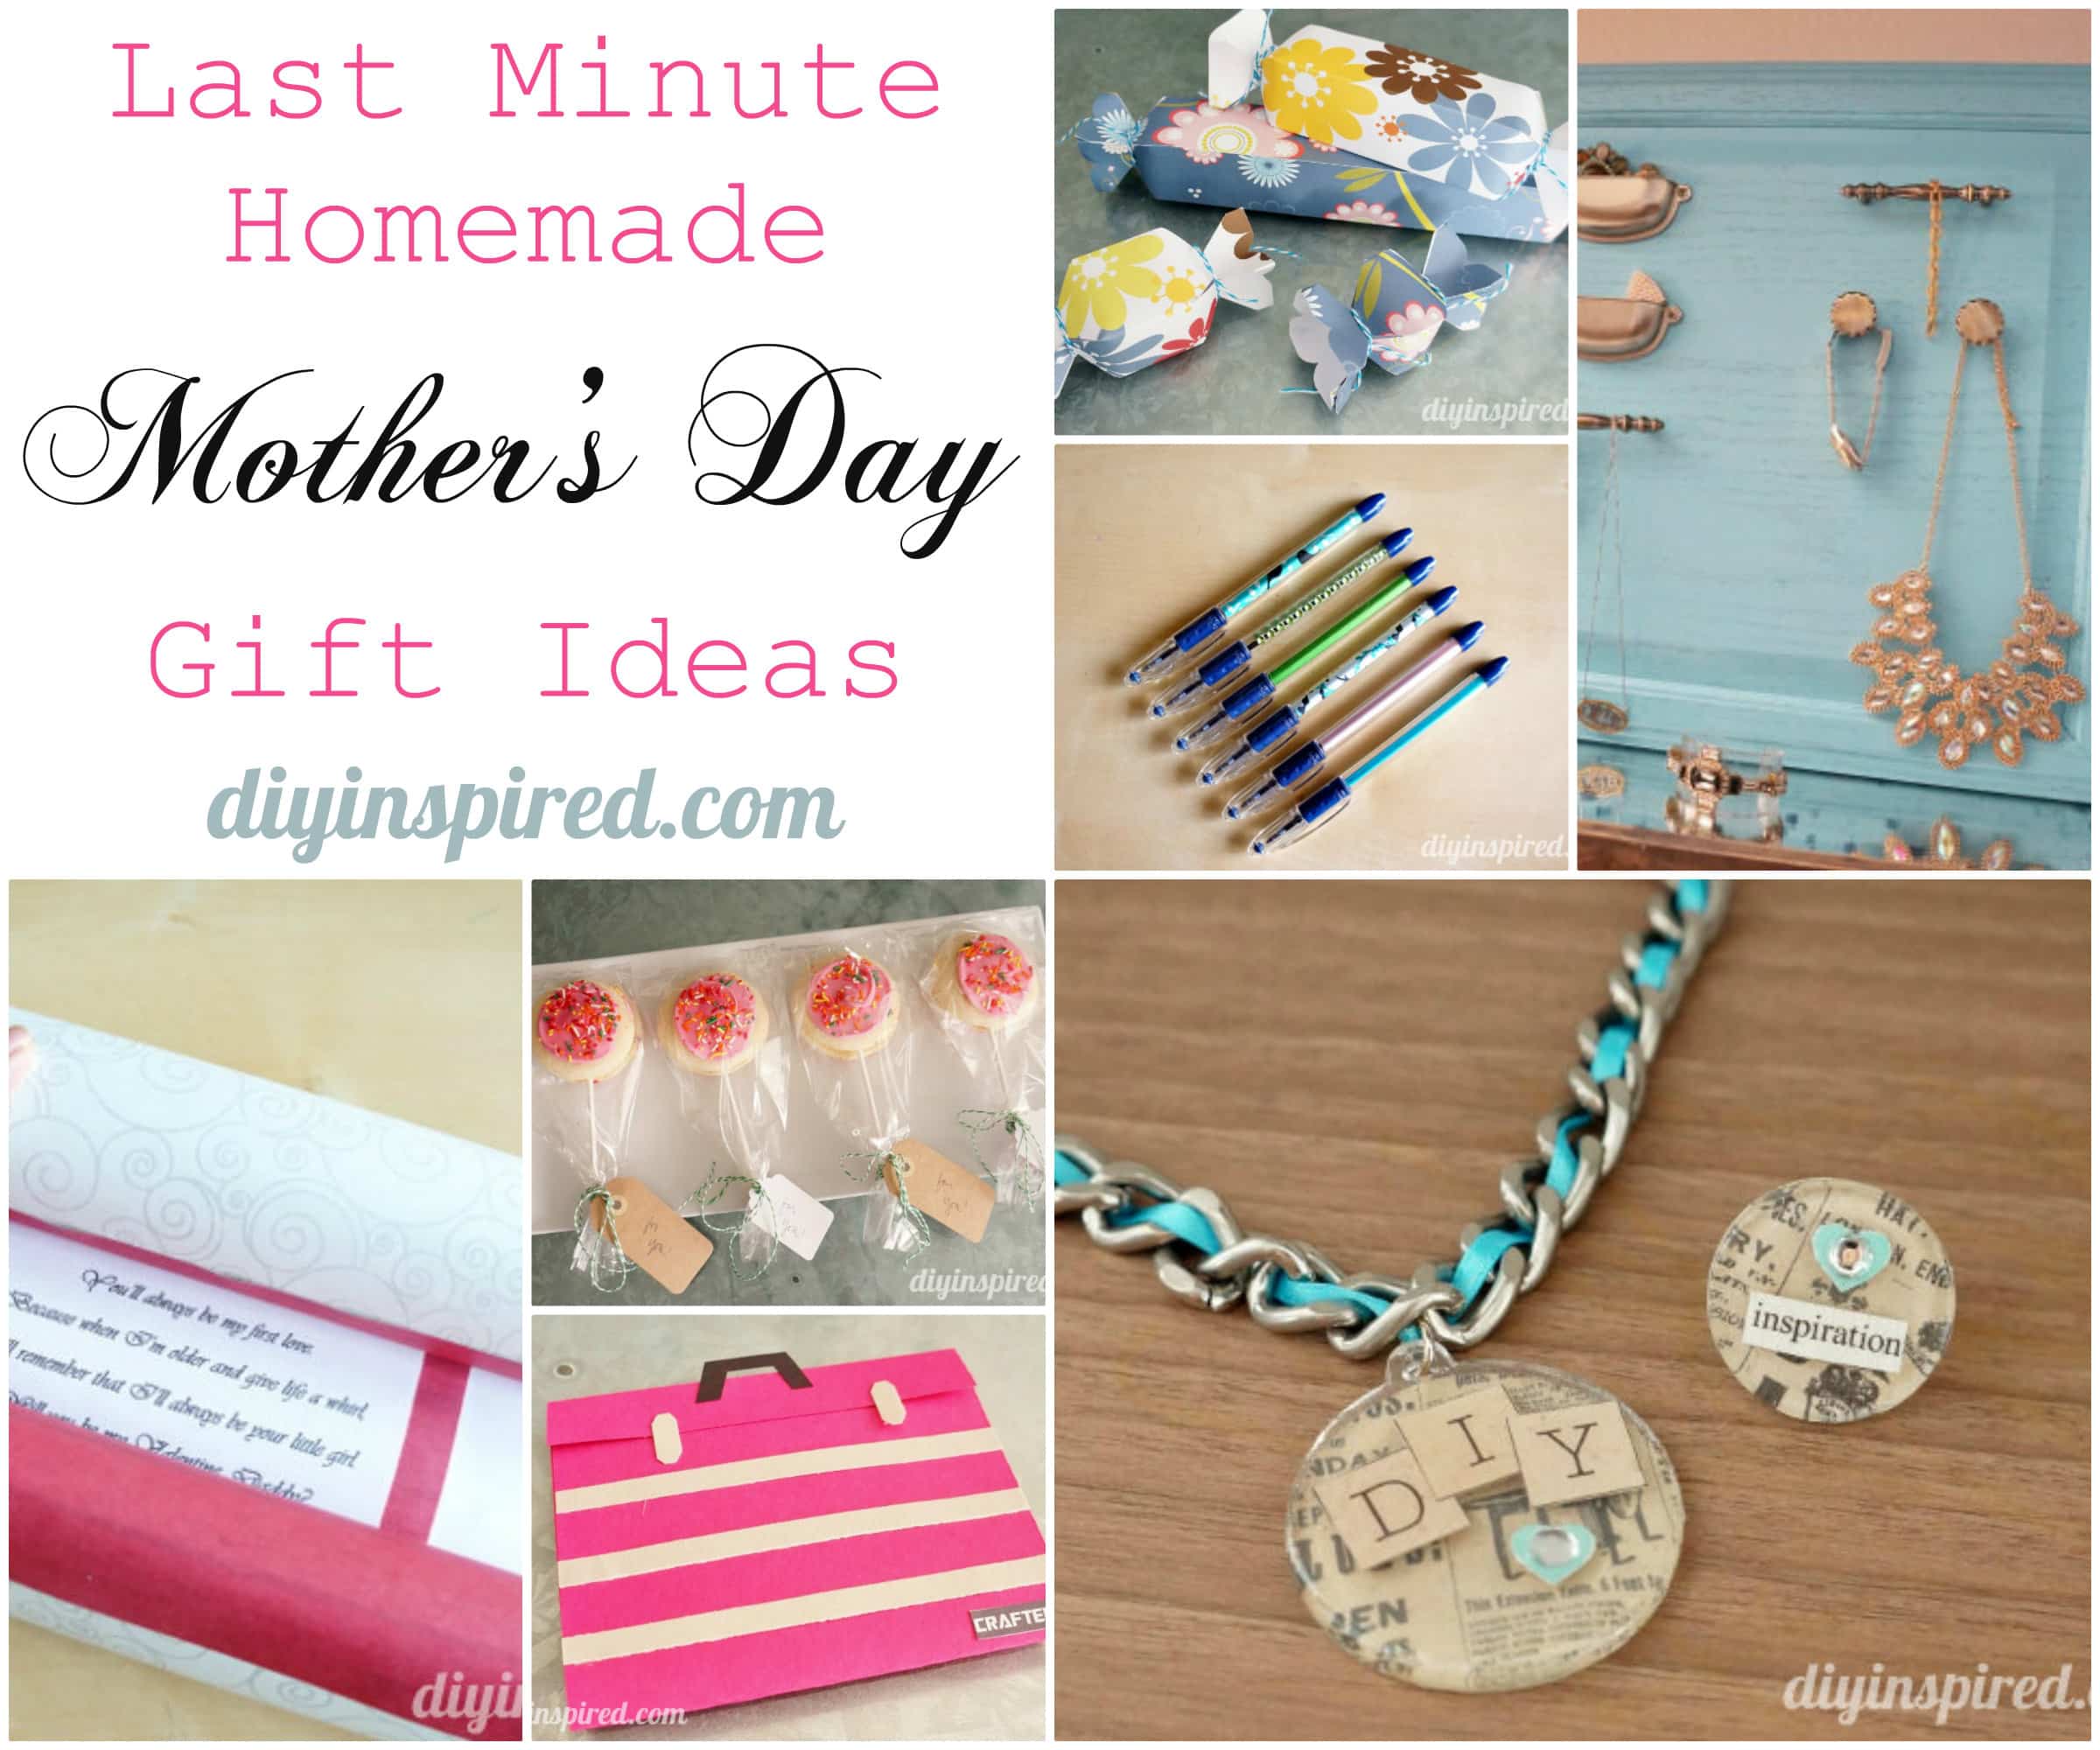 Last-Minute DIY Mother's Day Gift Ideas  Last minute diy mother's day gifts,  Mother's day diy, Diy mothers day gifts